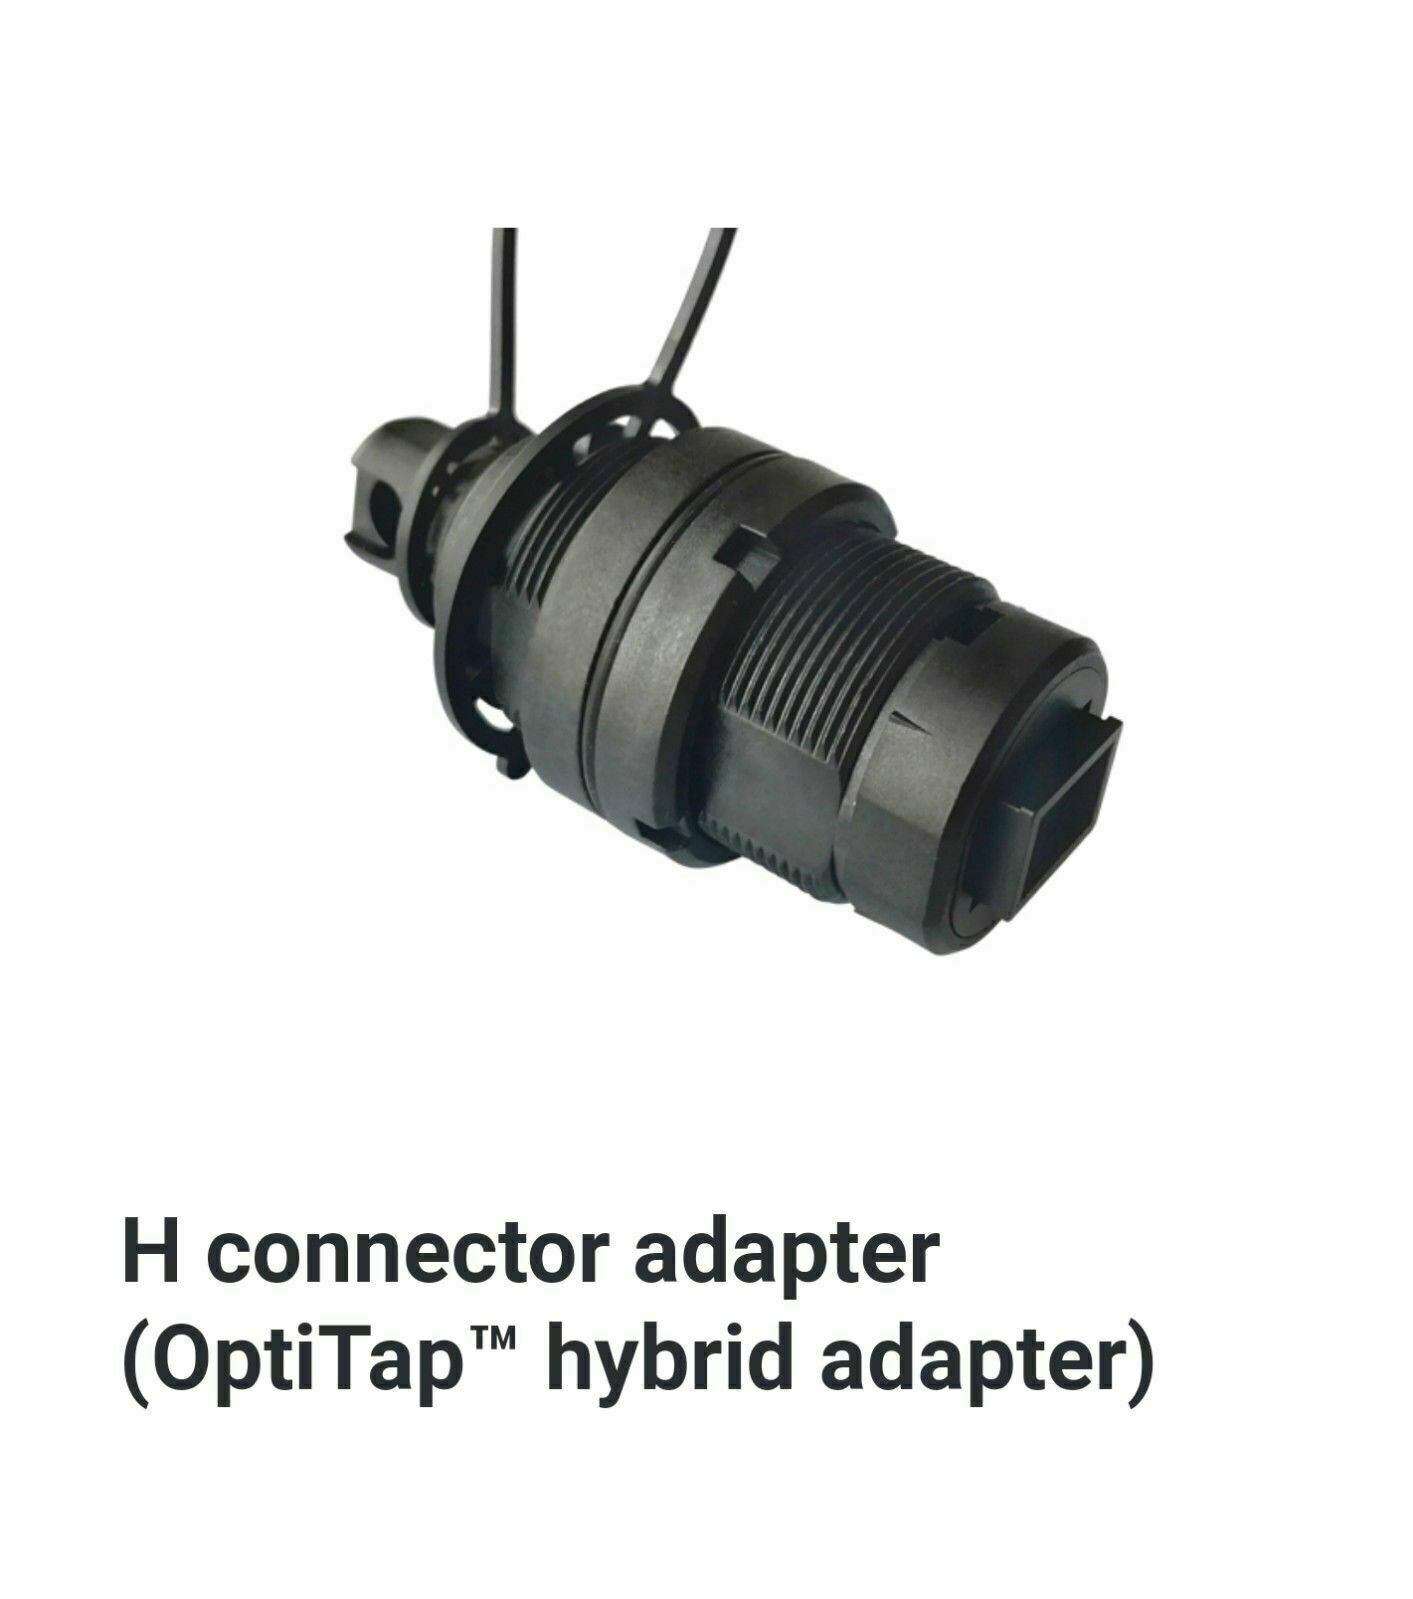 SC/APC Connector Adapter To SC Connector ( Corning Optitap Adapter ) used in ONT